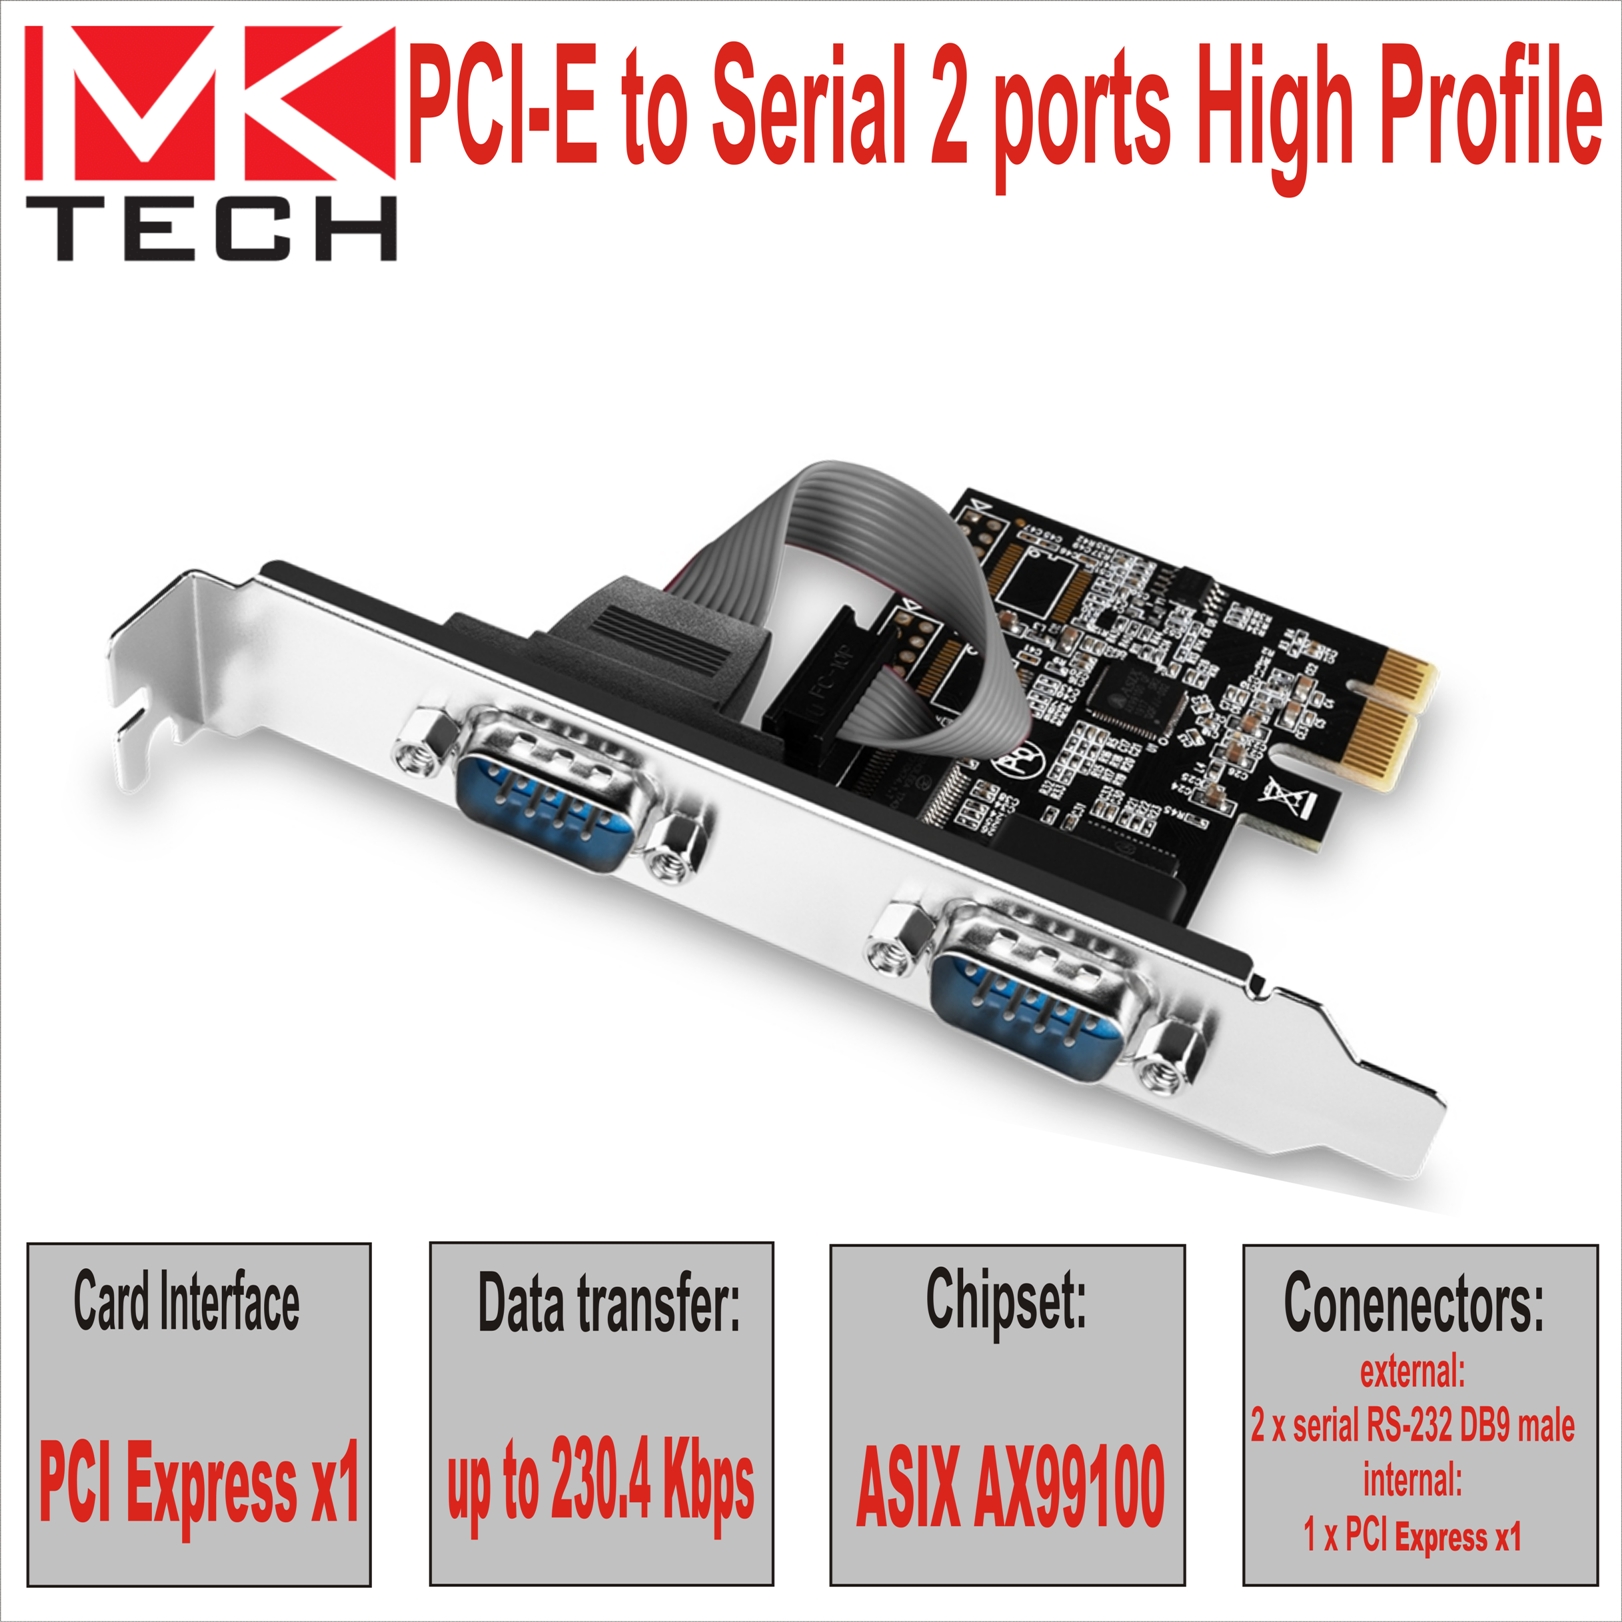 PCI-E to Serial 2 ports High Profile MKTECH